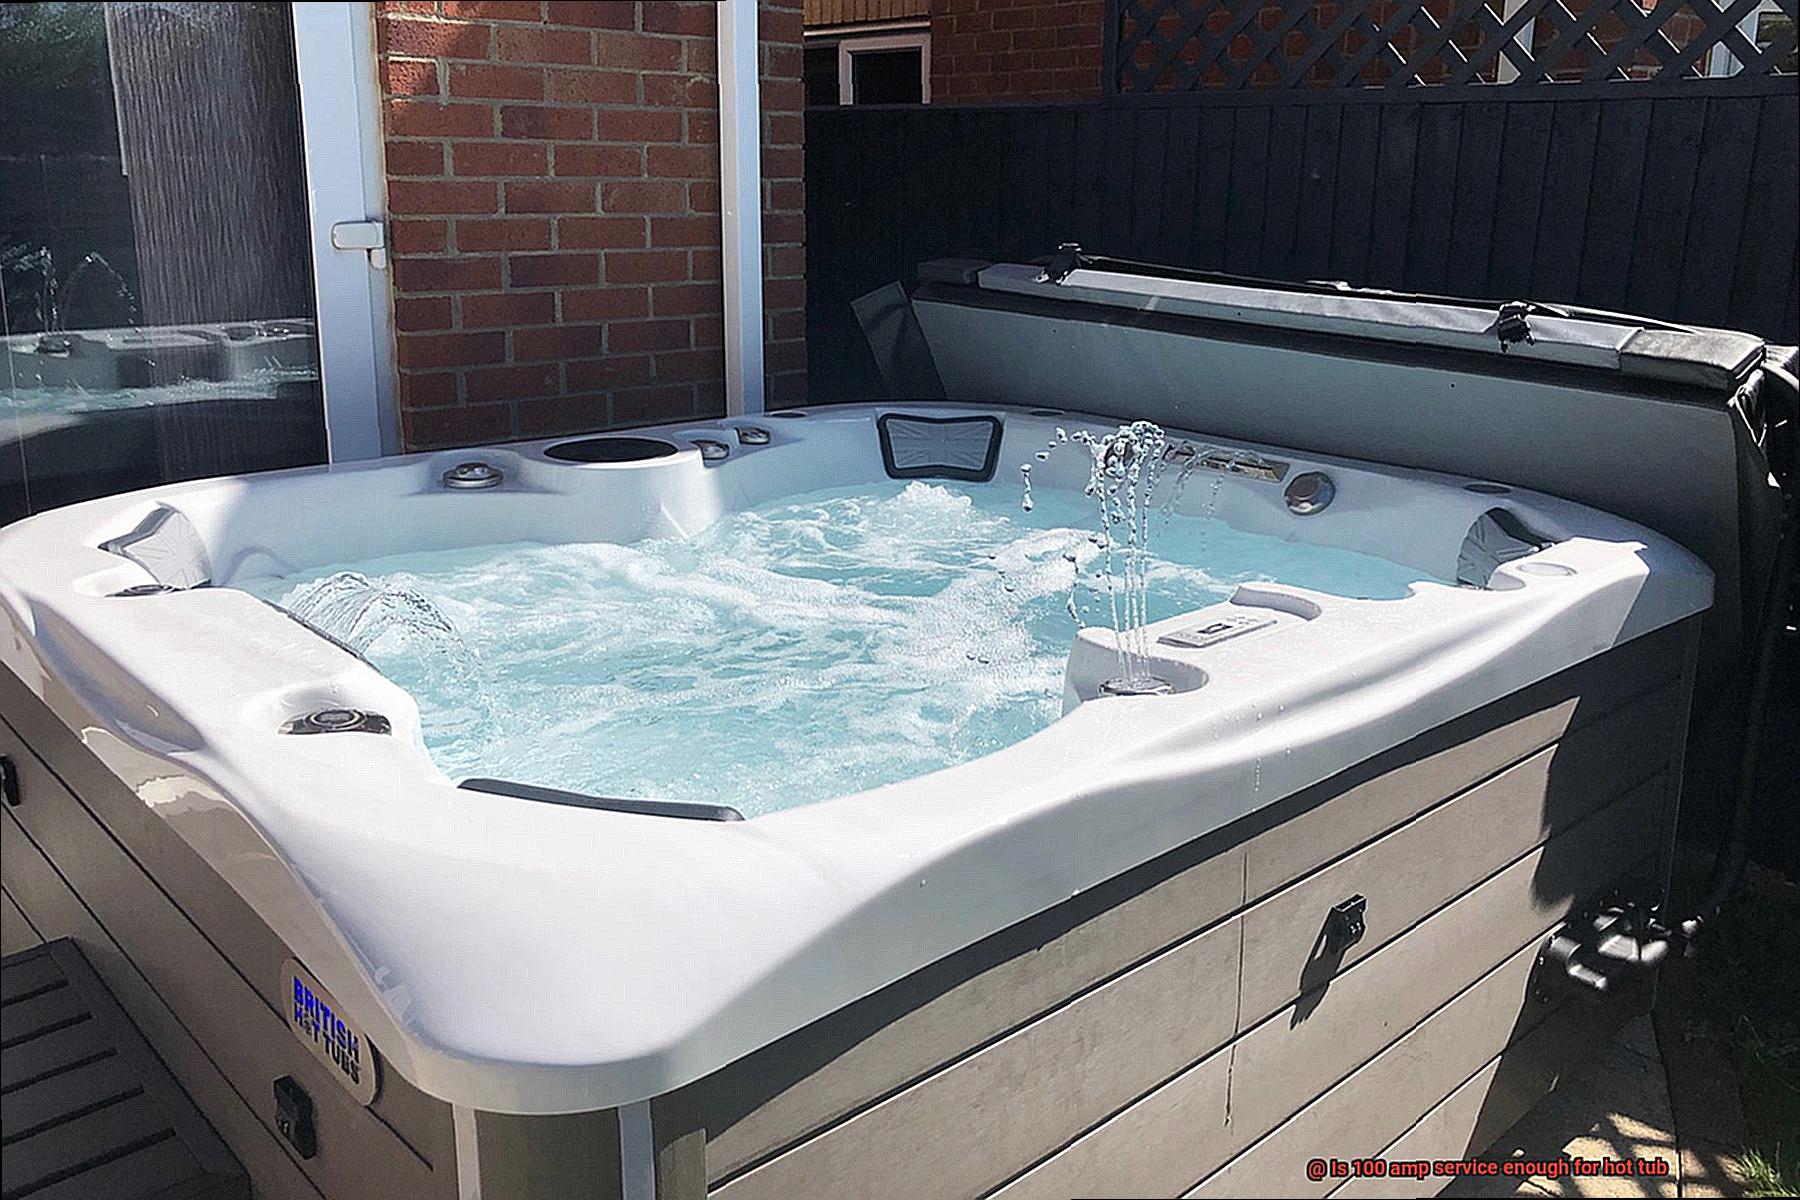 Is 100 amp service enough for hot tub-3